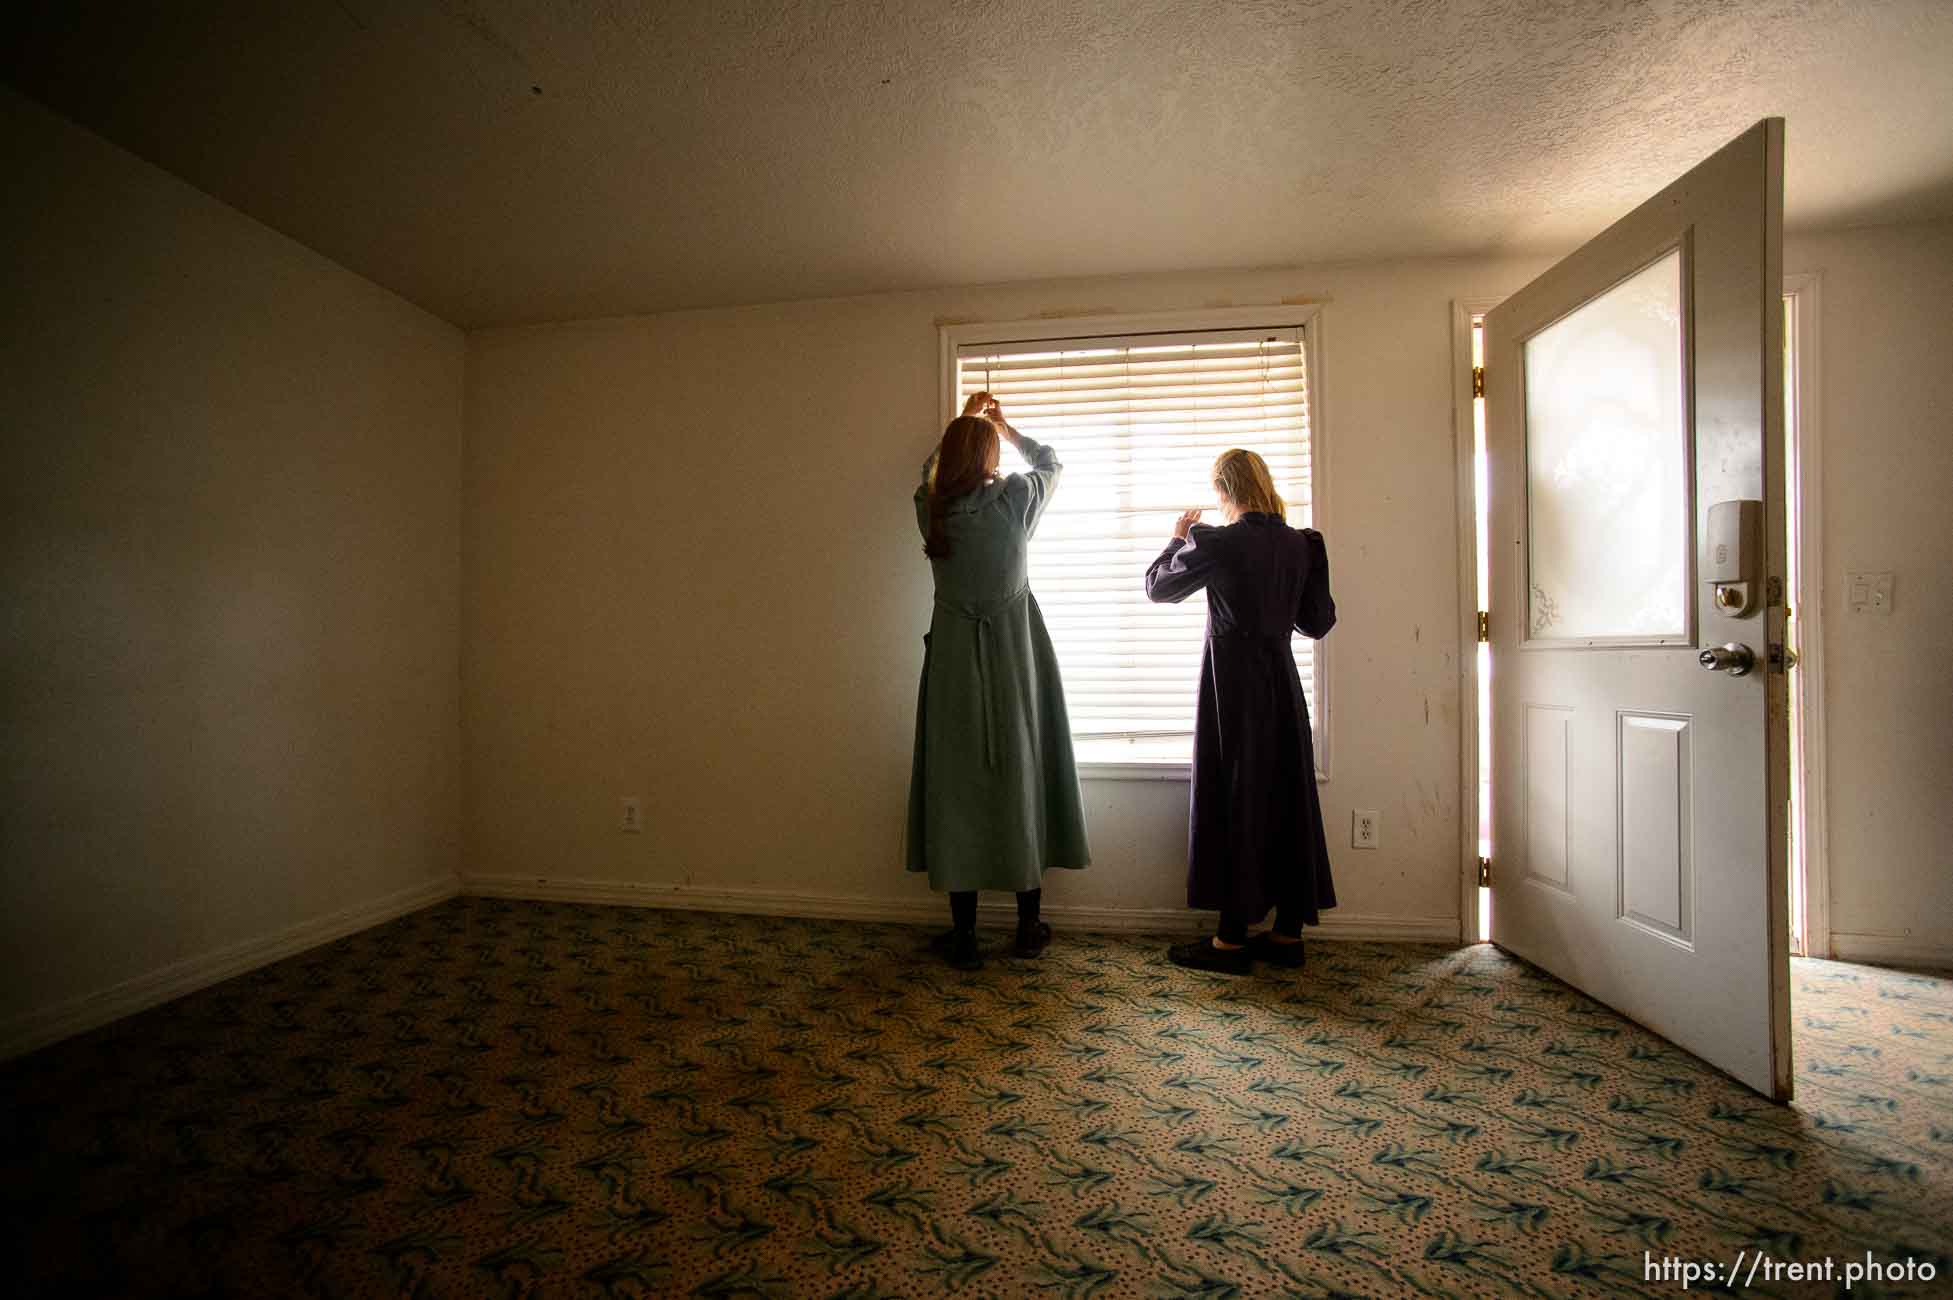 Trent Nelson  |  The Salt Lake TribuneFLDS children look on as a Colorado City, AZ, home across the street has its locks changed in an eviction by the UEP Trust, Tuesday May 9, 2017.